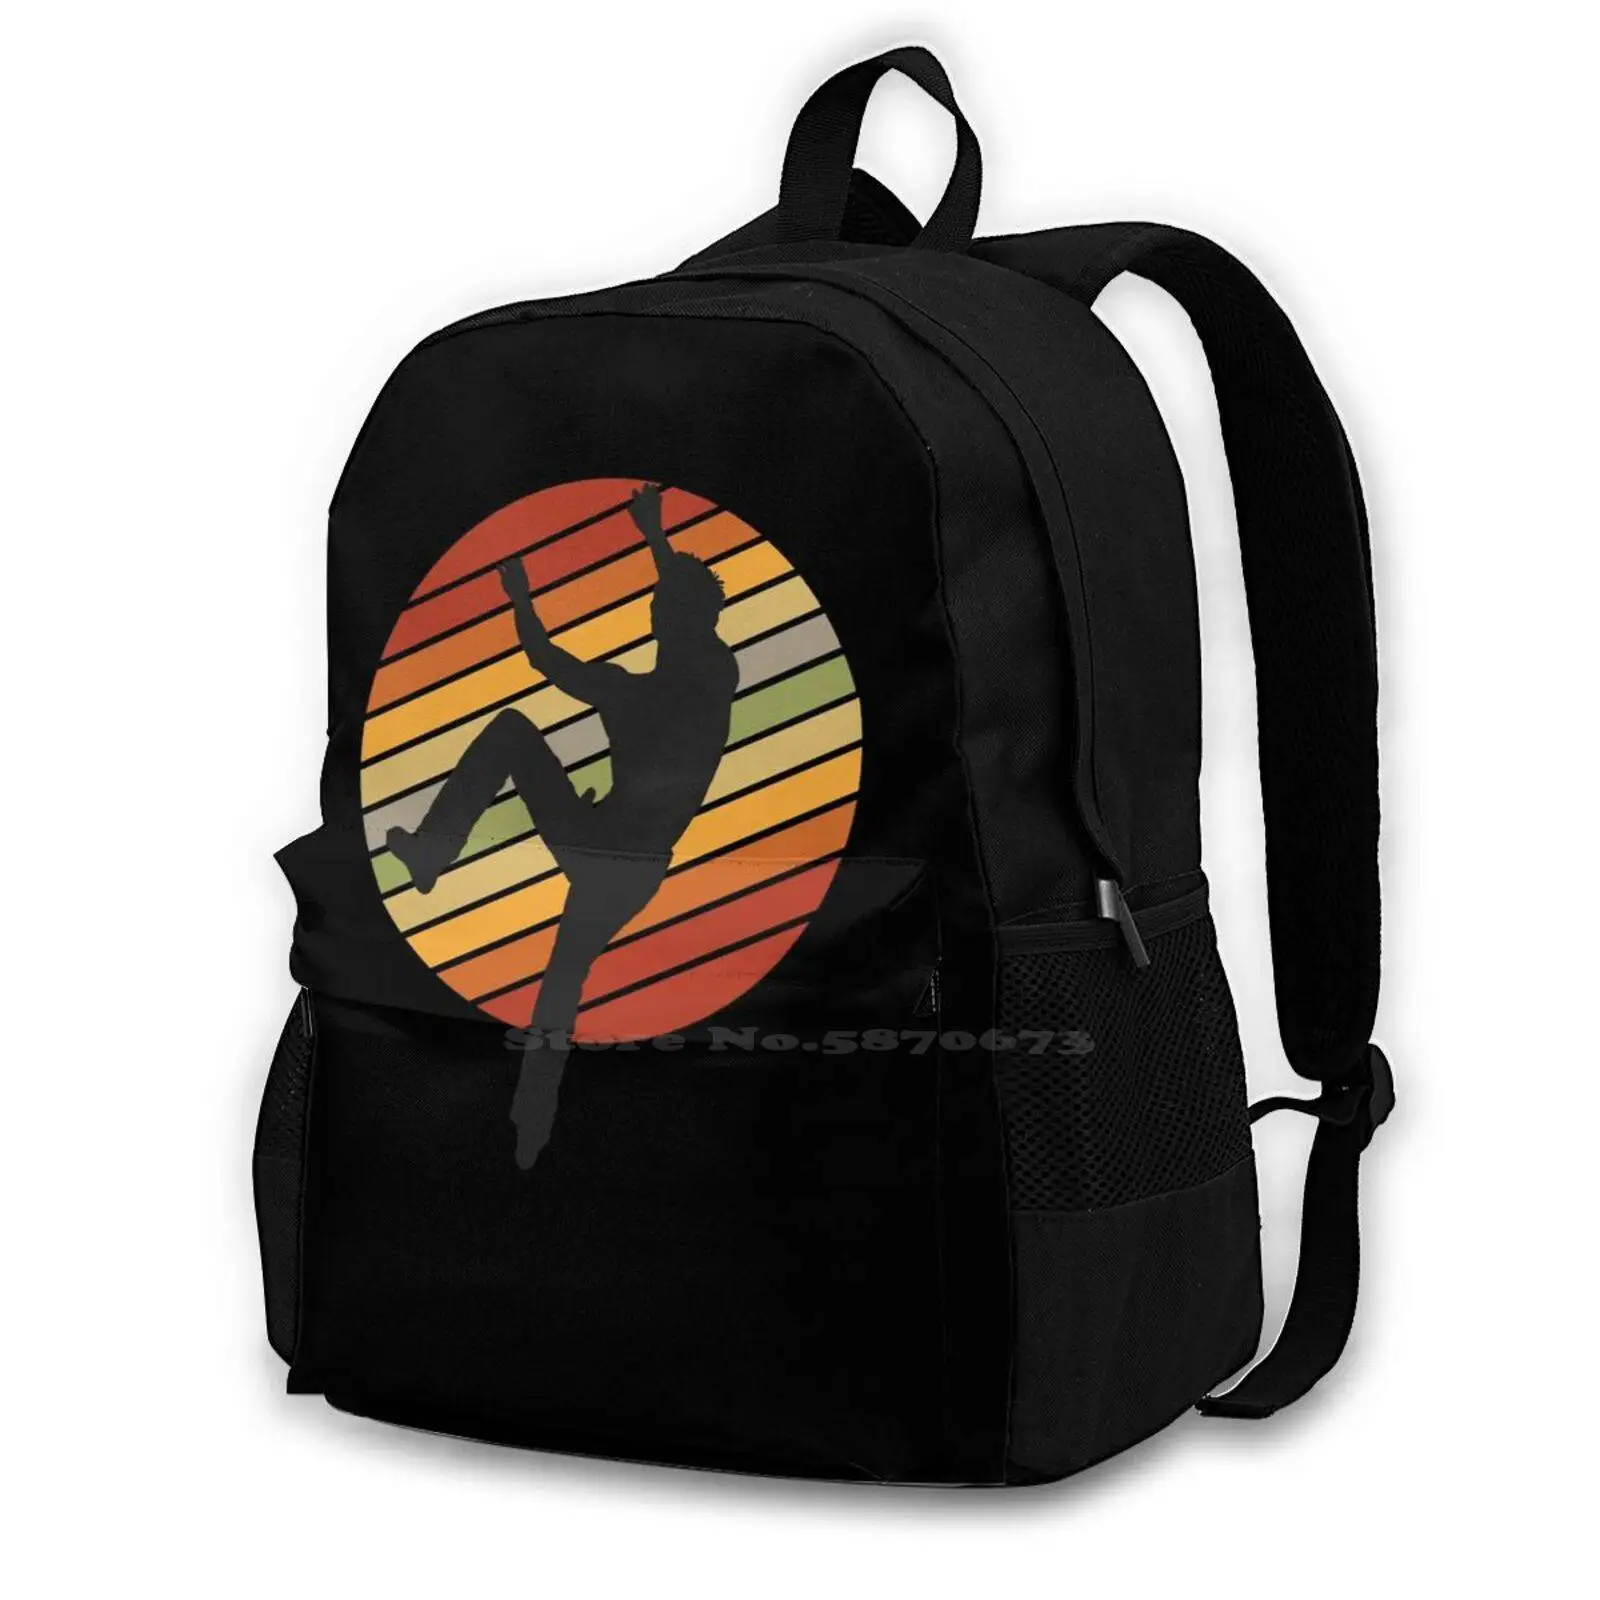 

Bouldering I Climber On Climbing Wall I Retro Look School Bags For Teenage Girls Laptop Travel Bags Bouldering Climb Climber